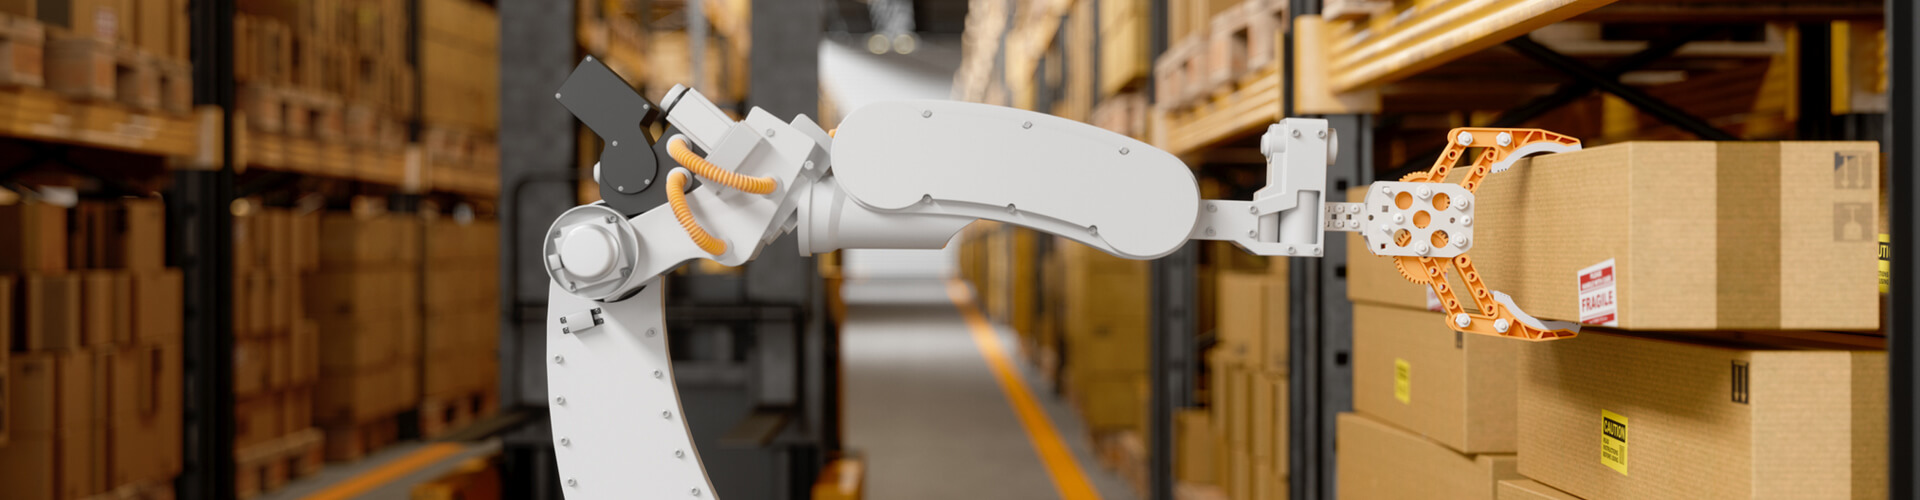 Robotic arm working in warehouse